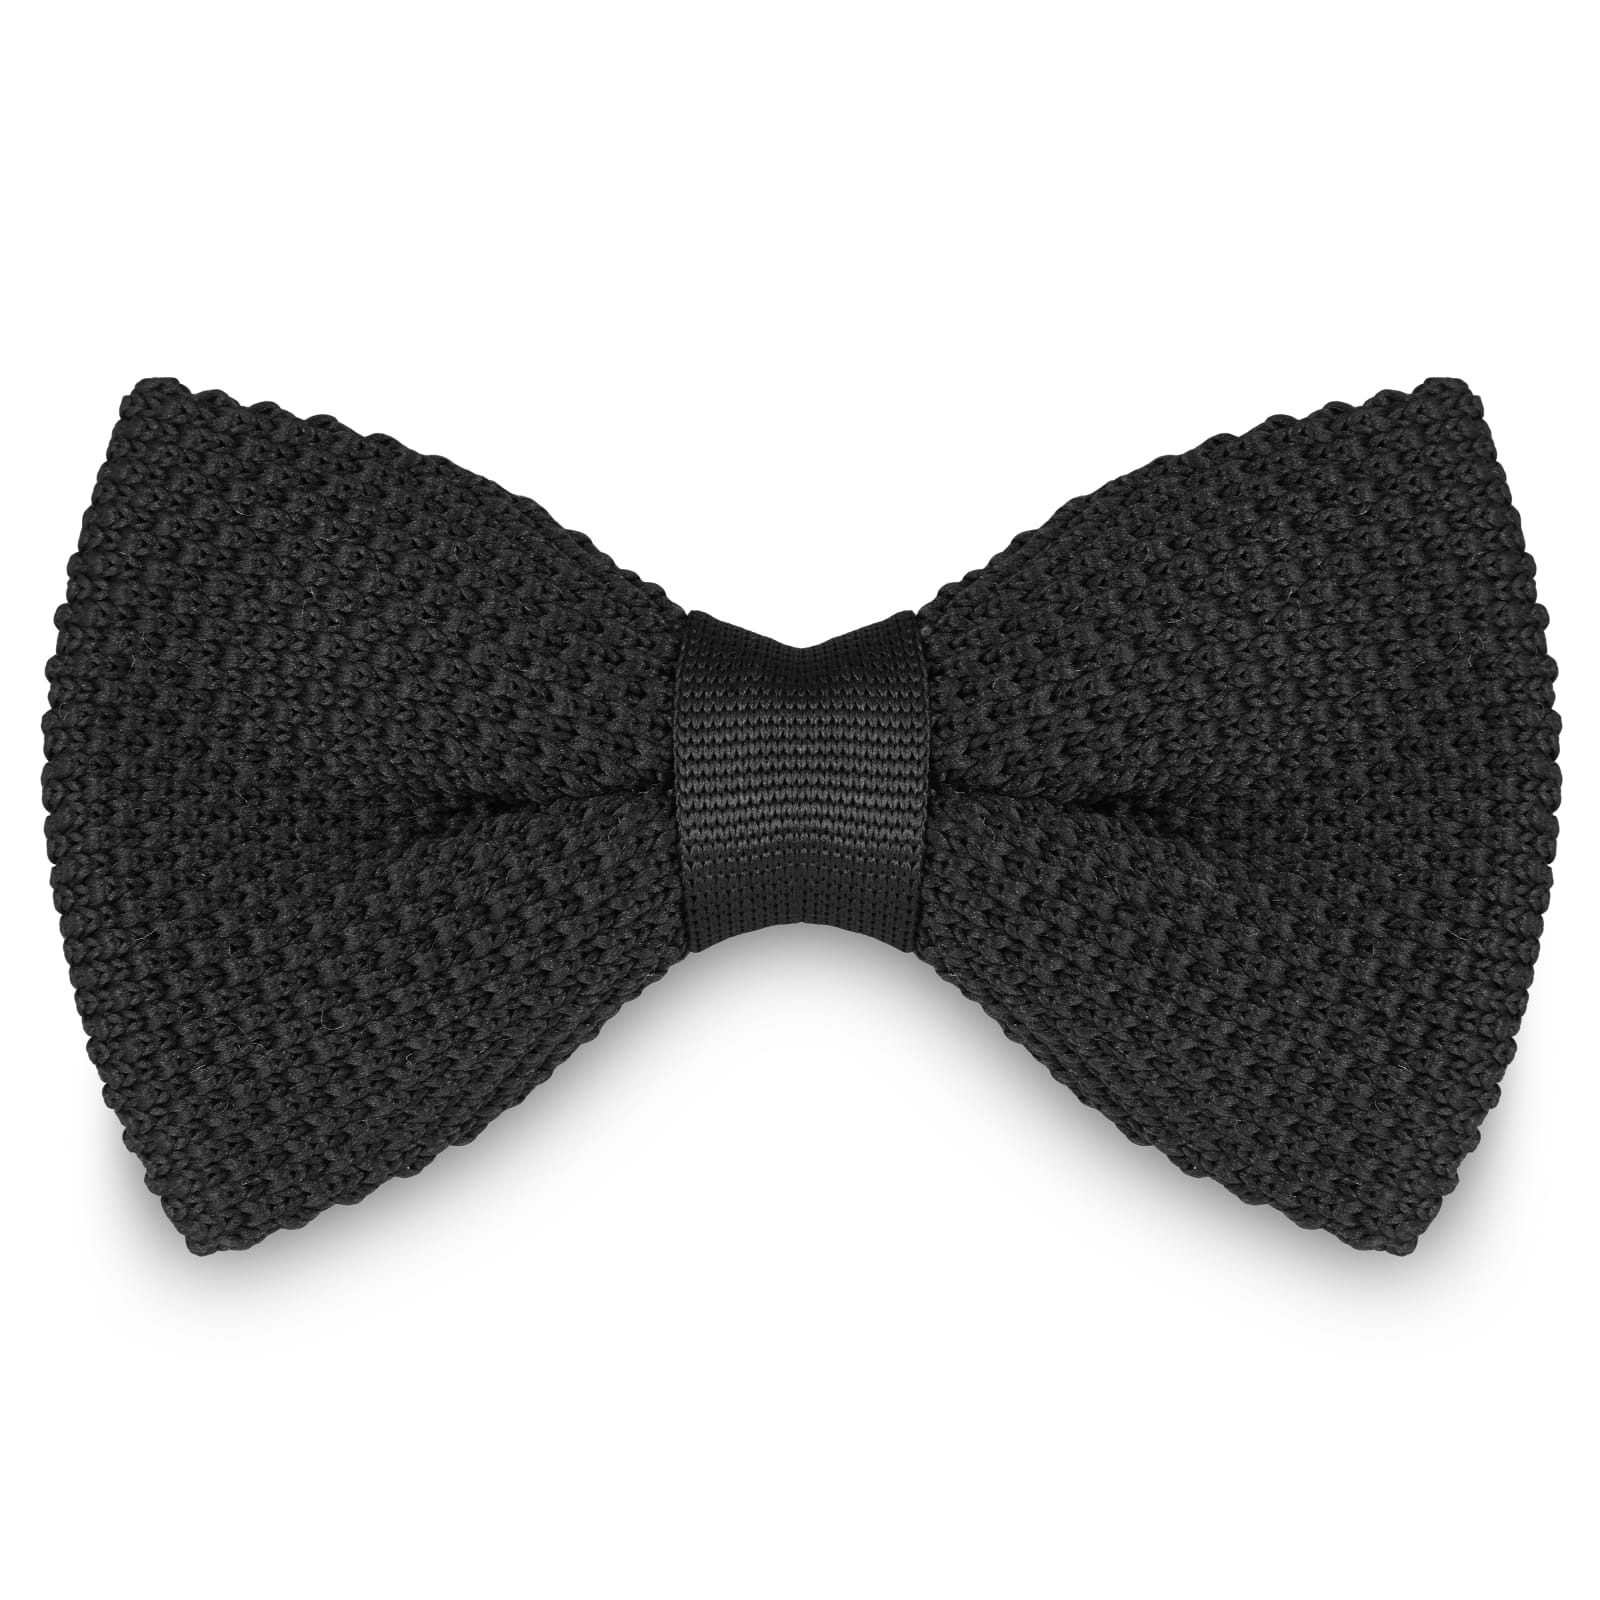 BLACK KNITTED BOW TIES